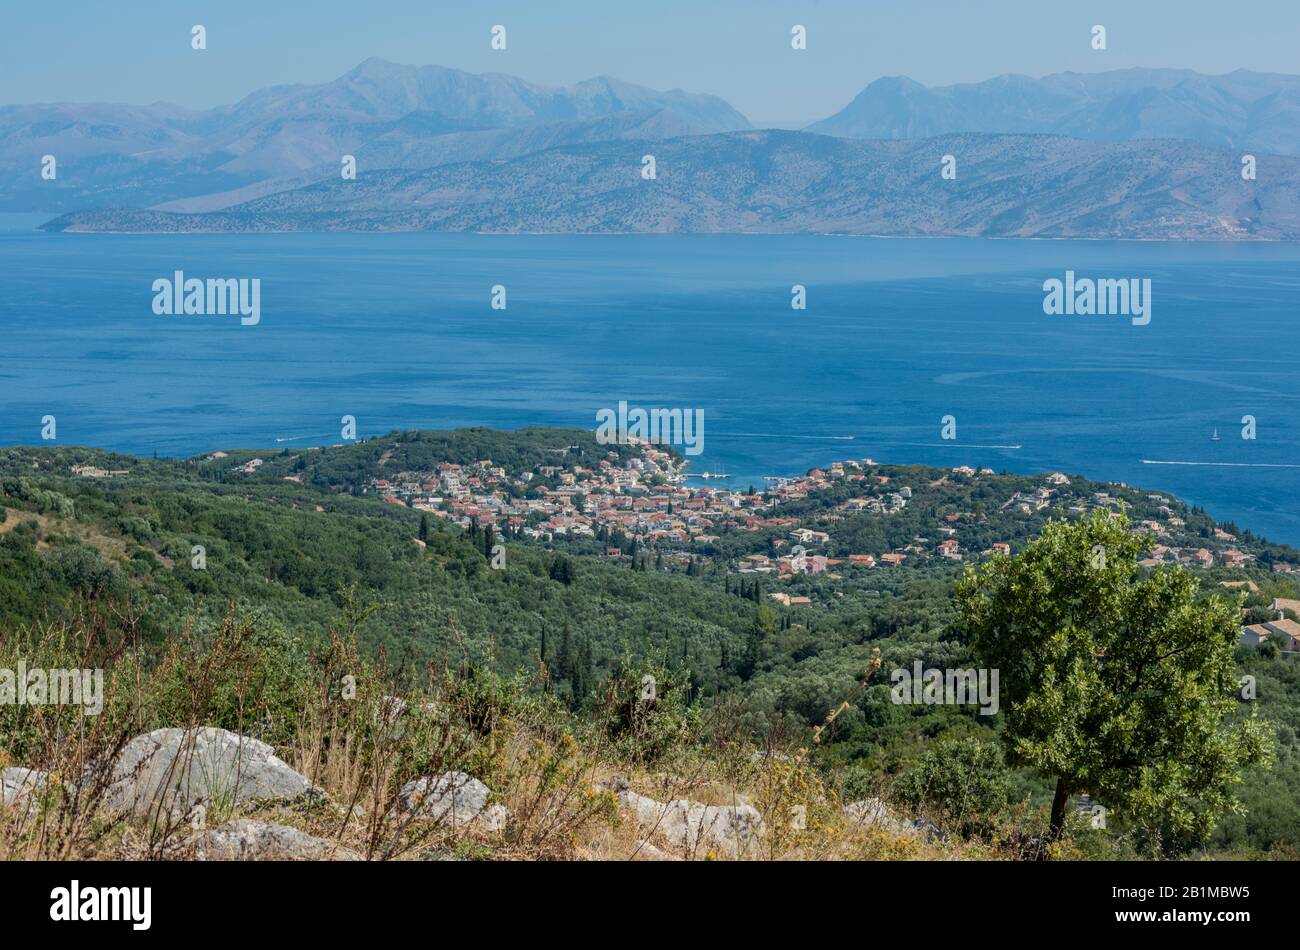 A view from the hills or mountains above the Greek town or village of kassiopi in the Greek mountains. Stock Photo